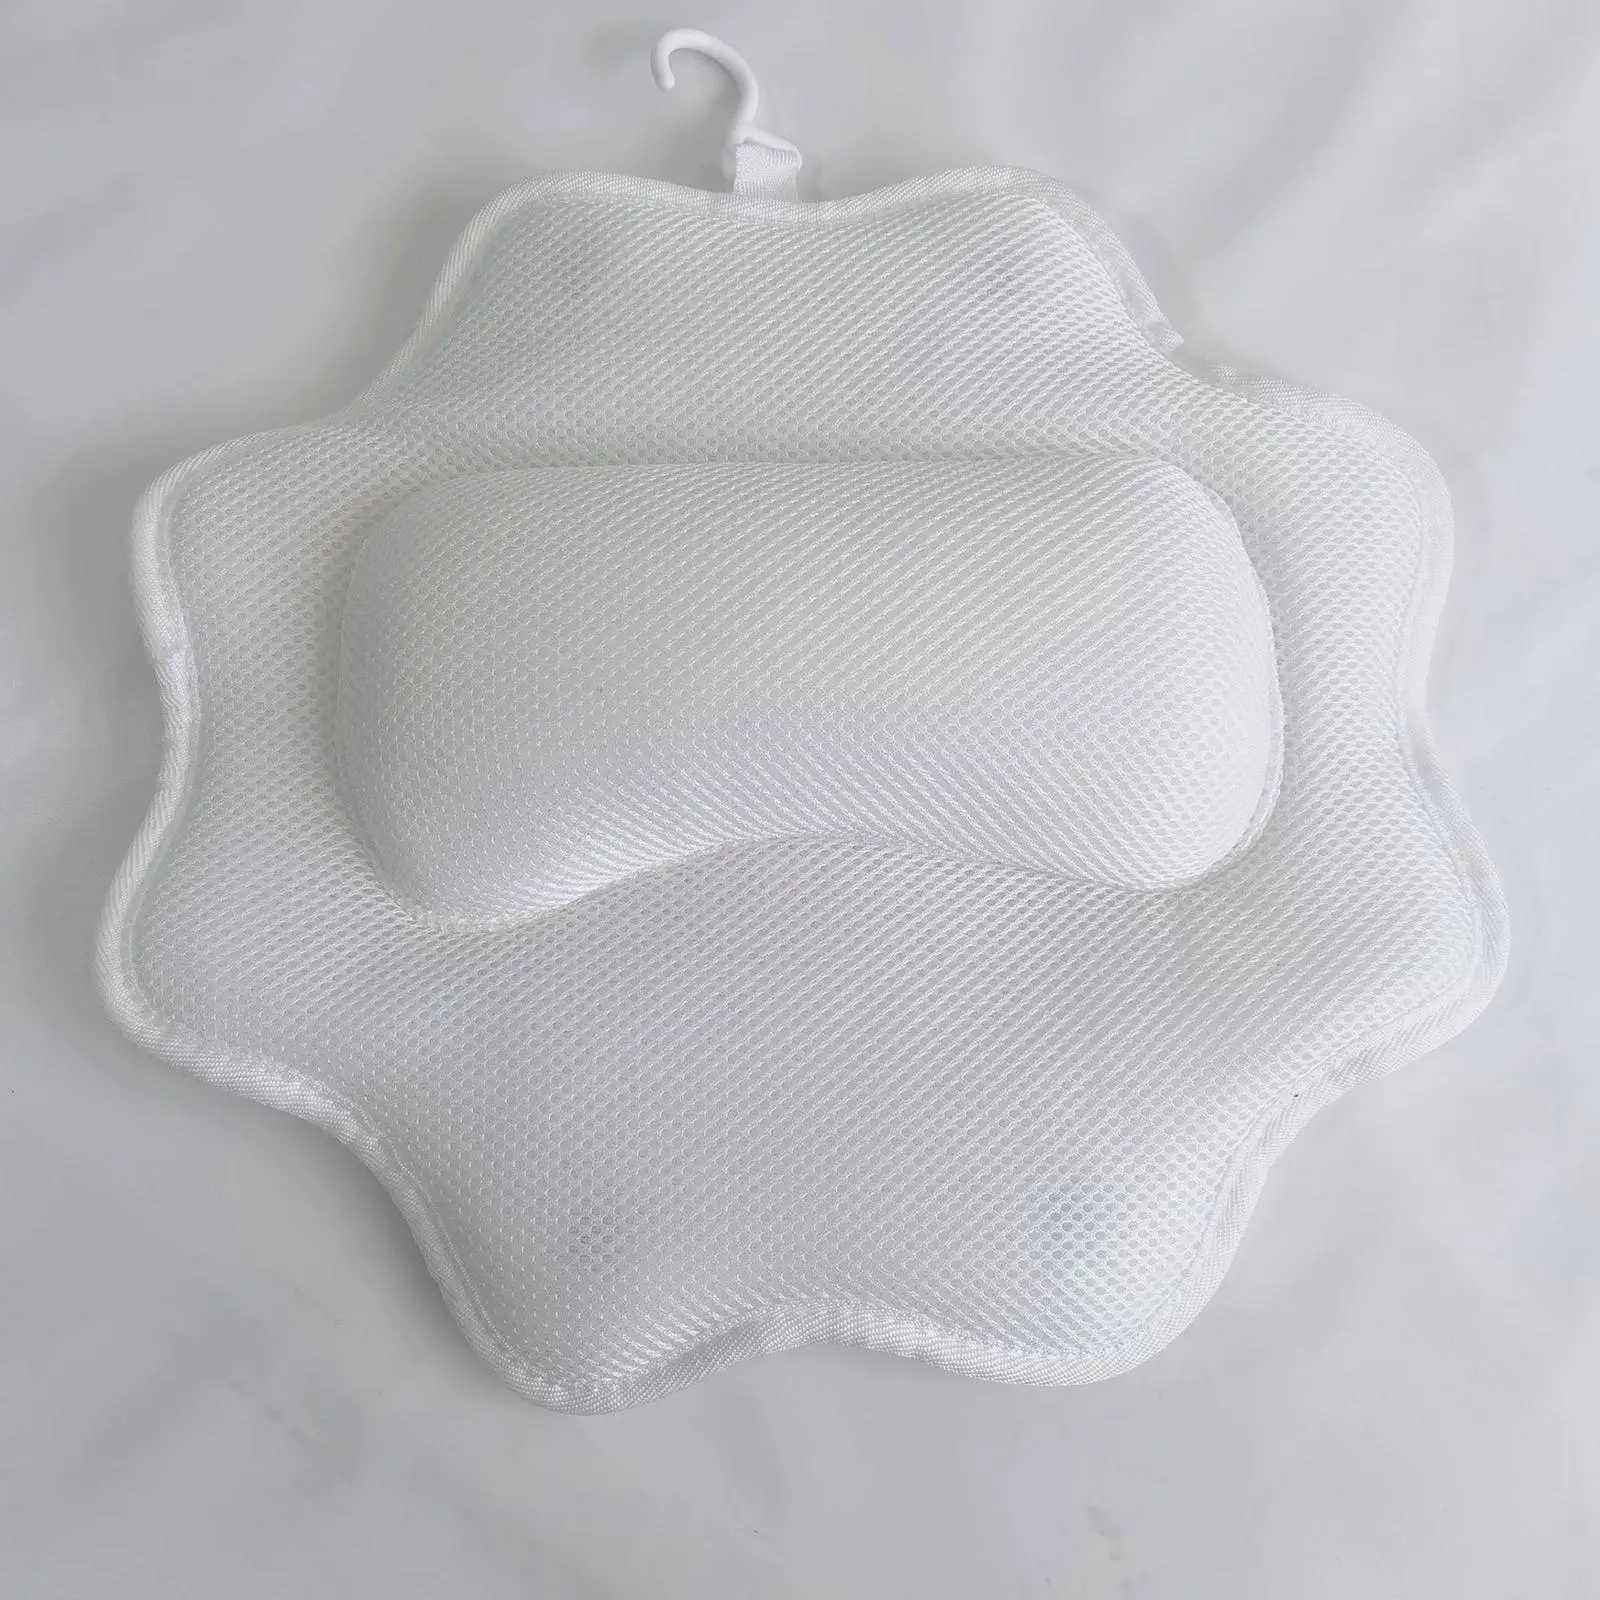 SPA Pillow Bath Tub Neck support Headrest Thickened Back Neck Support Pillow for SPA